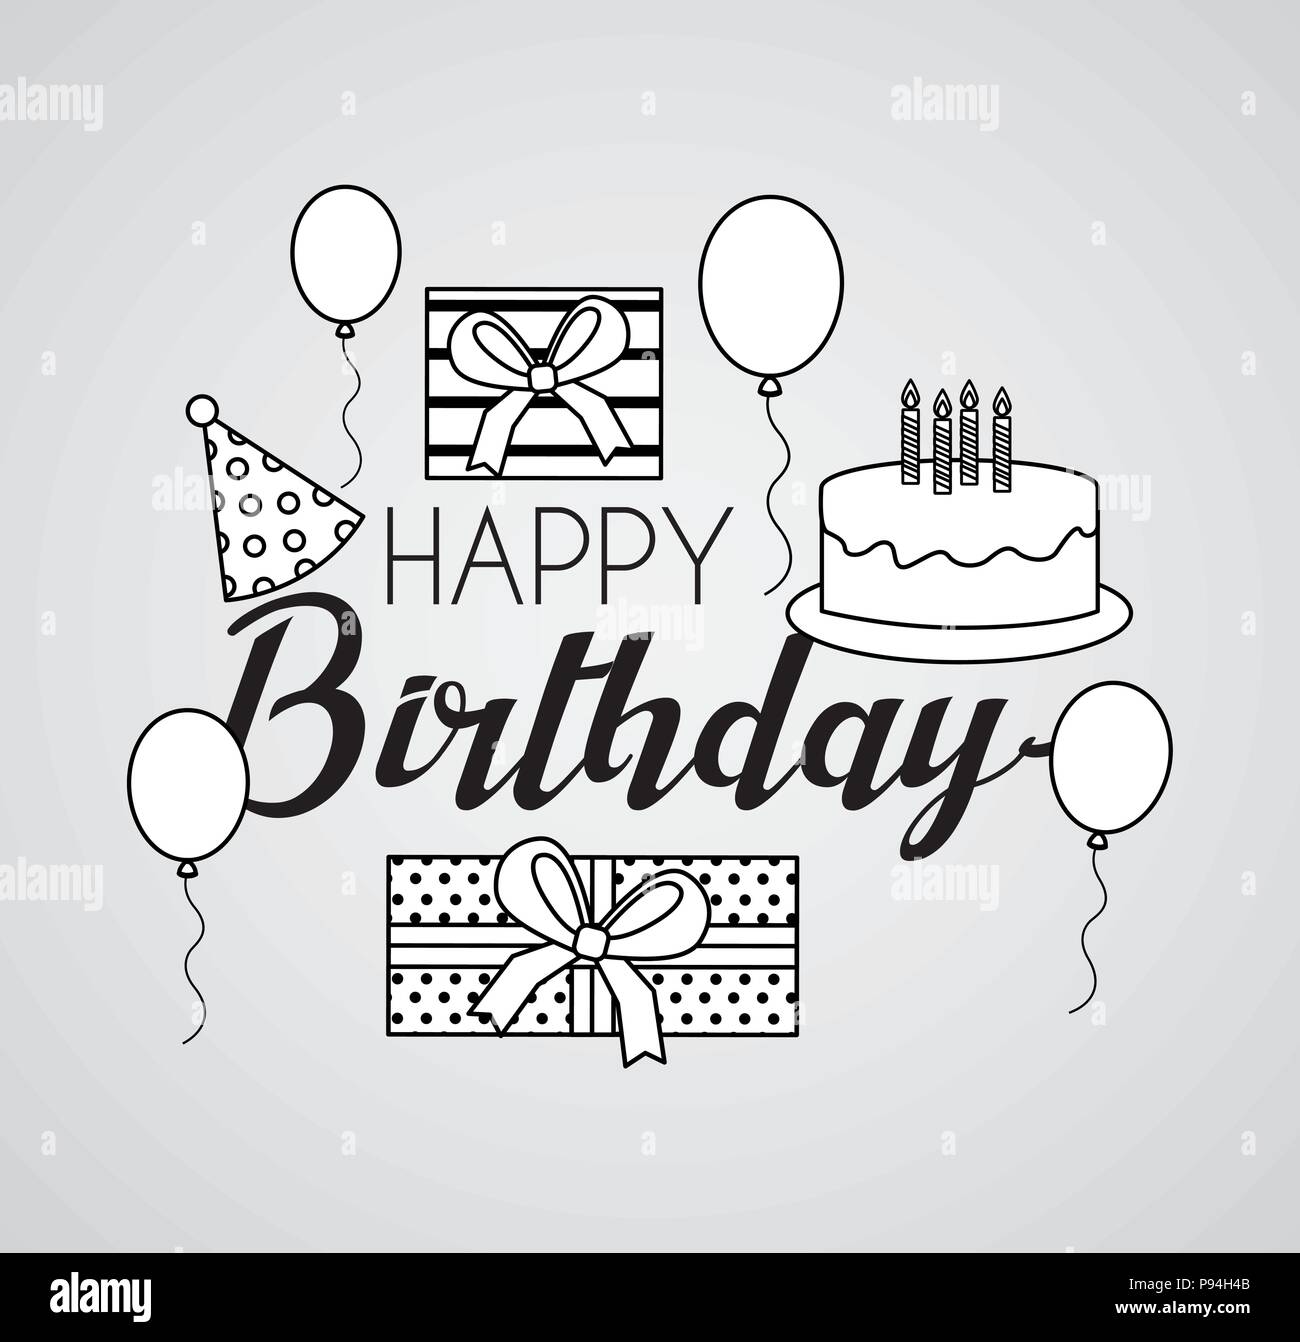 Happy birthday card draw ballons chapeaux gâteau sign vector illustration  Image Vectorielle Stock - Alamy